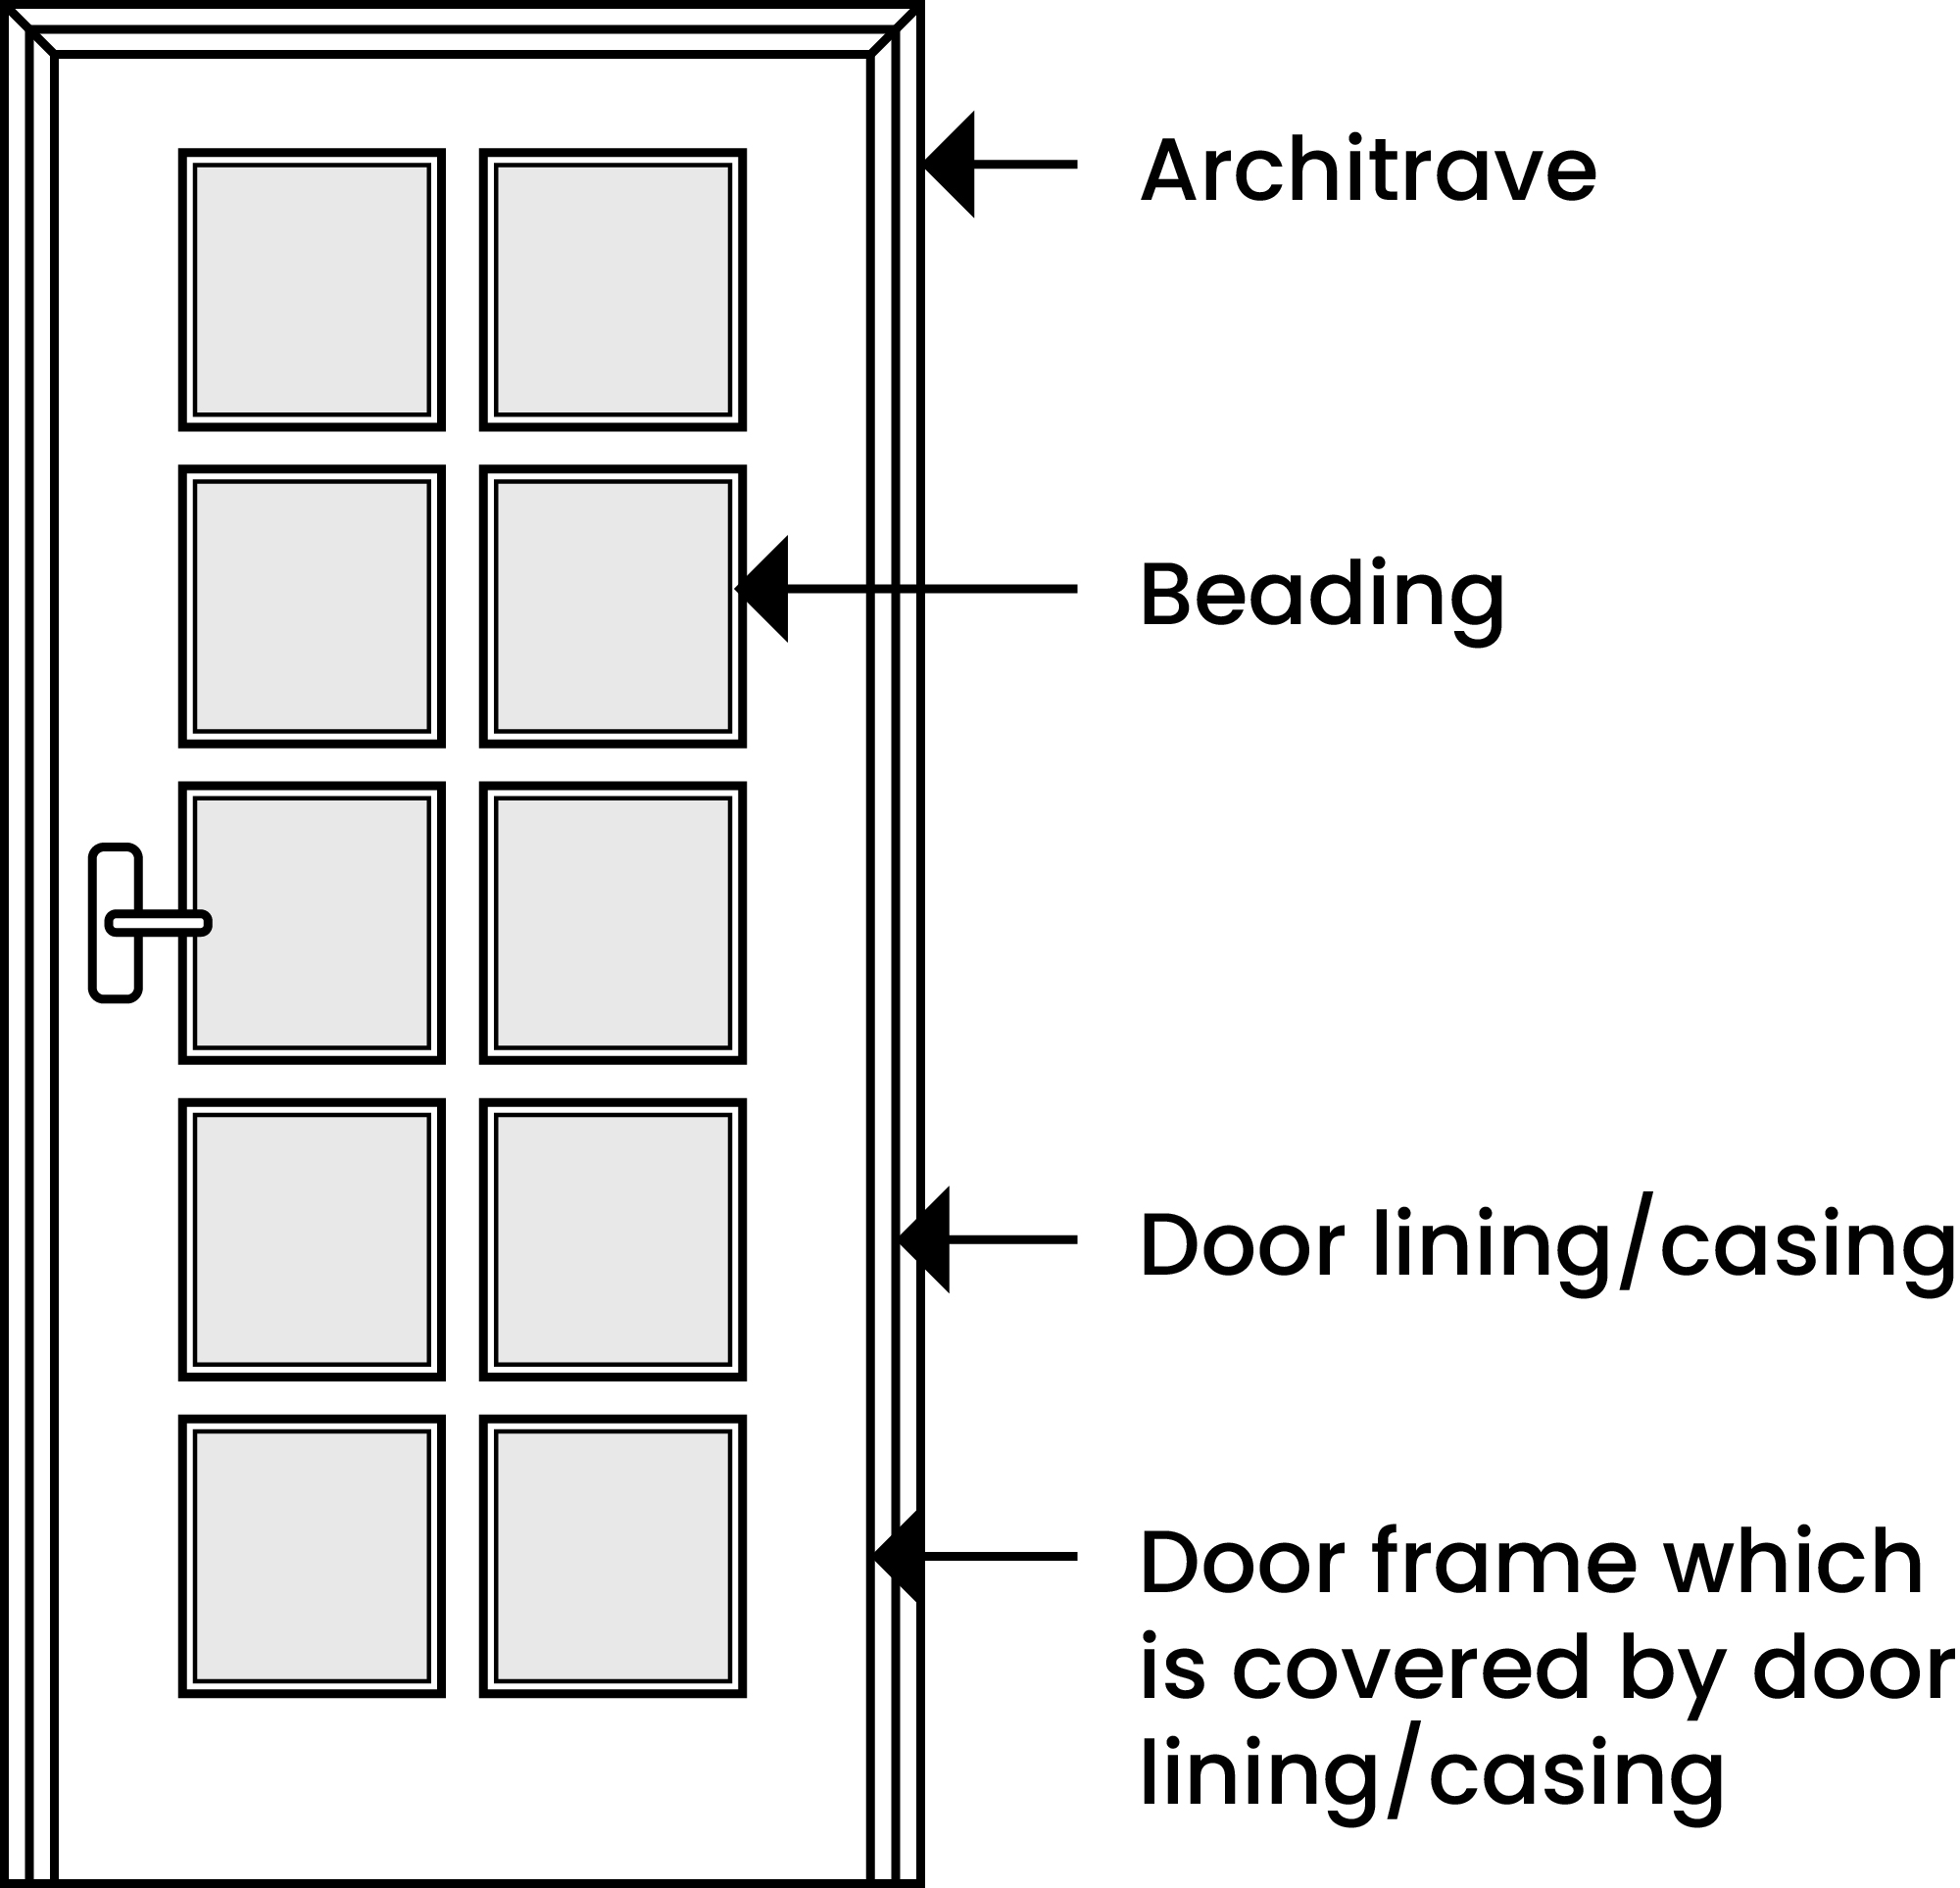 Diagram showing the different parts of a door.